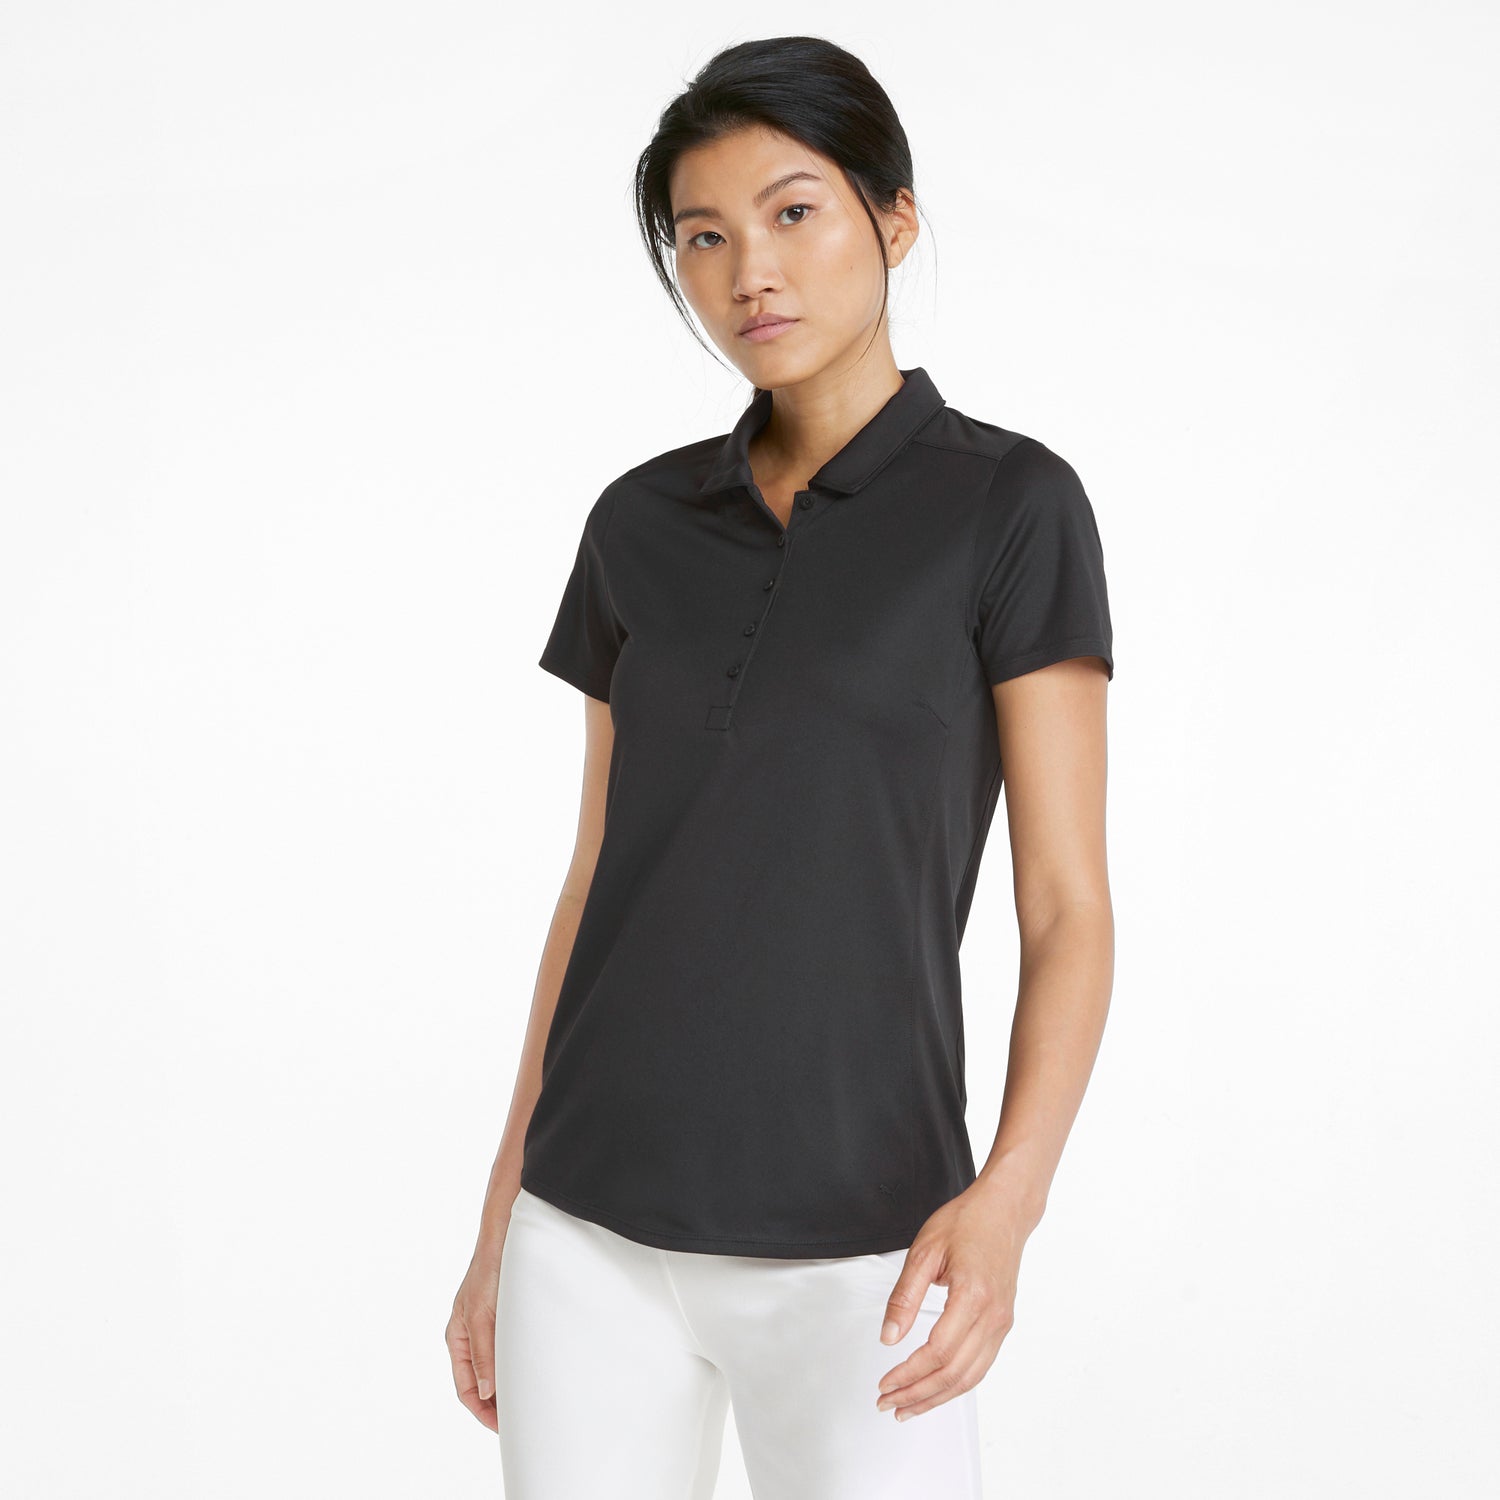 Colorful Golf Shirt - Fresh Flavors Women's Polo. Only $39.95